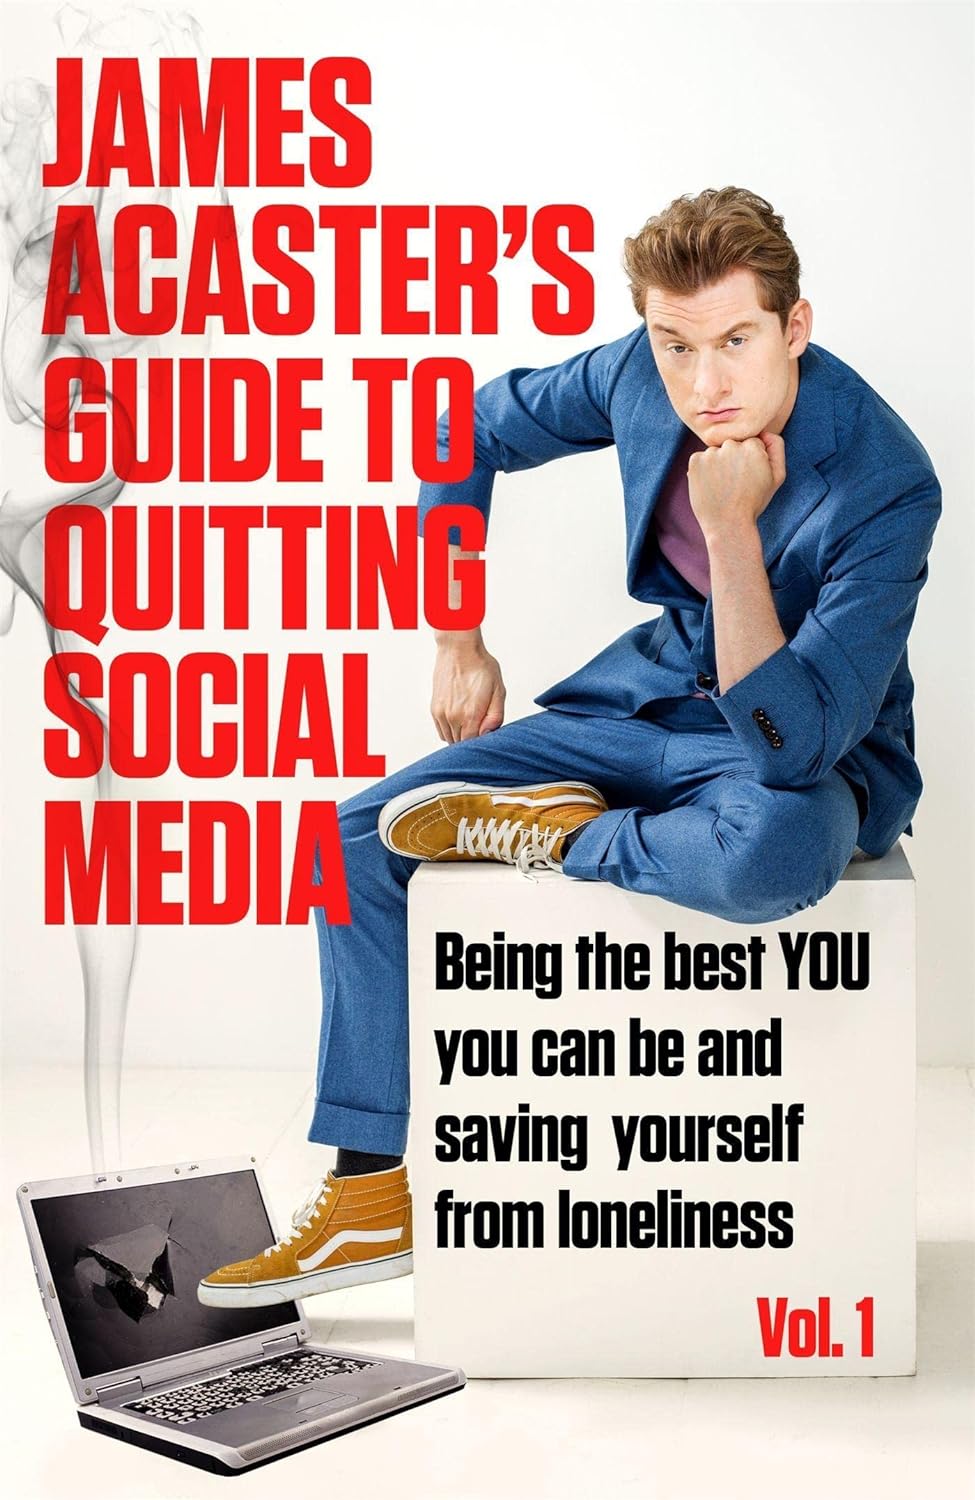 James Acaster: James Acaster's Guide to Quitting Social Media (2022, Headline Publishing Group)